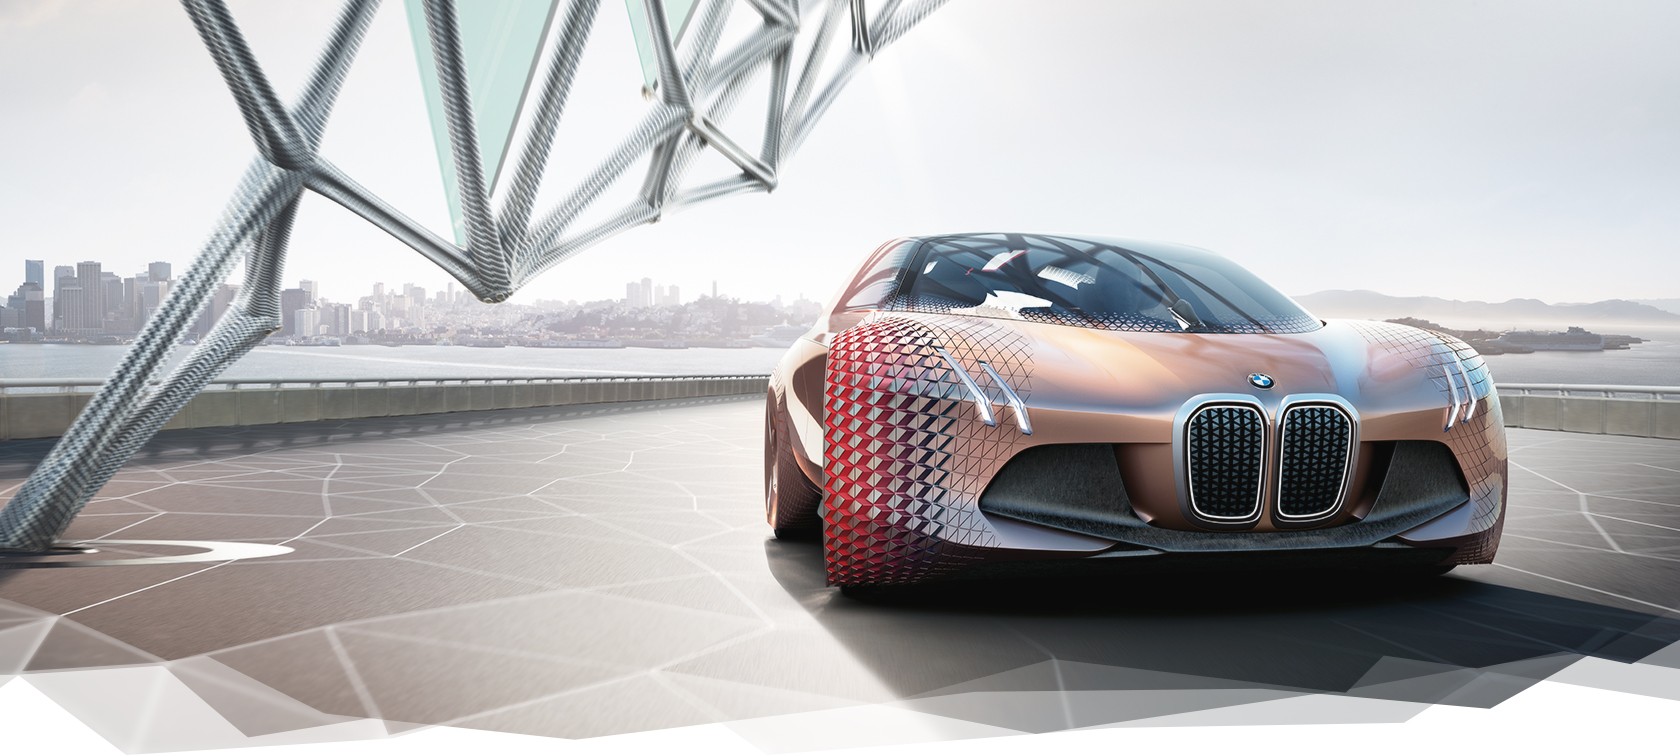 BMW shows off concept car for the self-driving future | Daily Mail Online